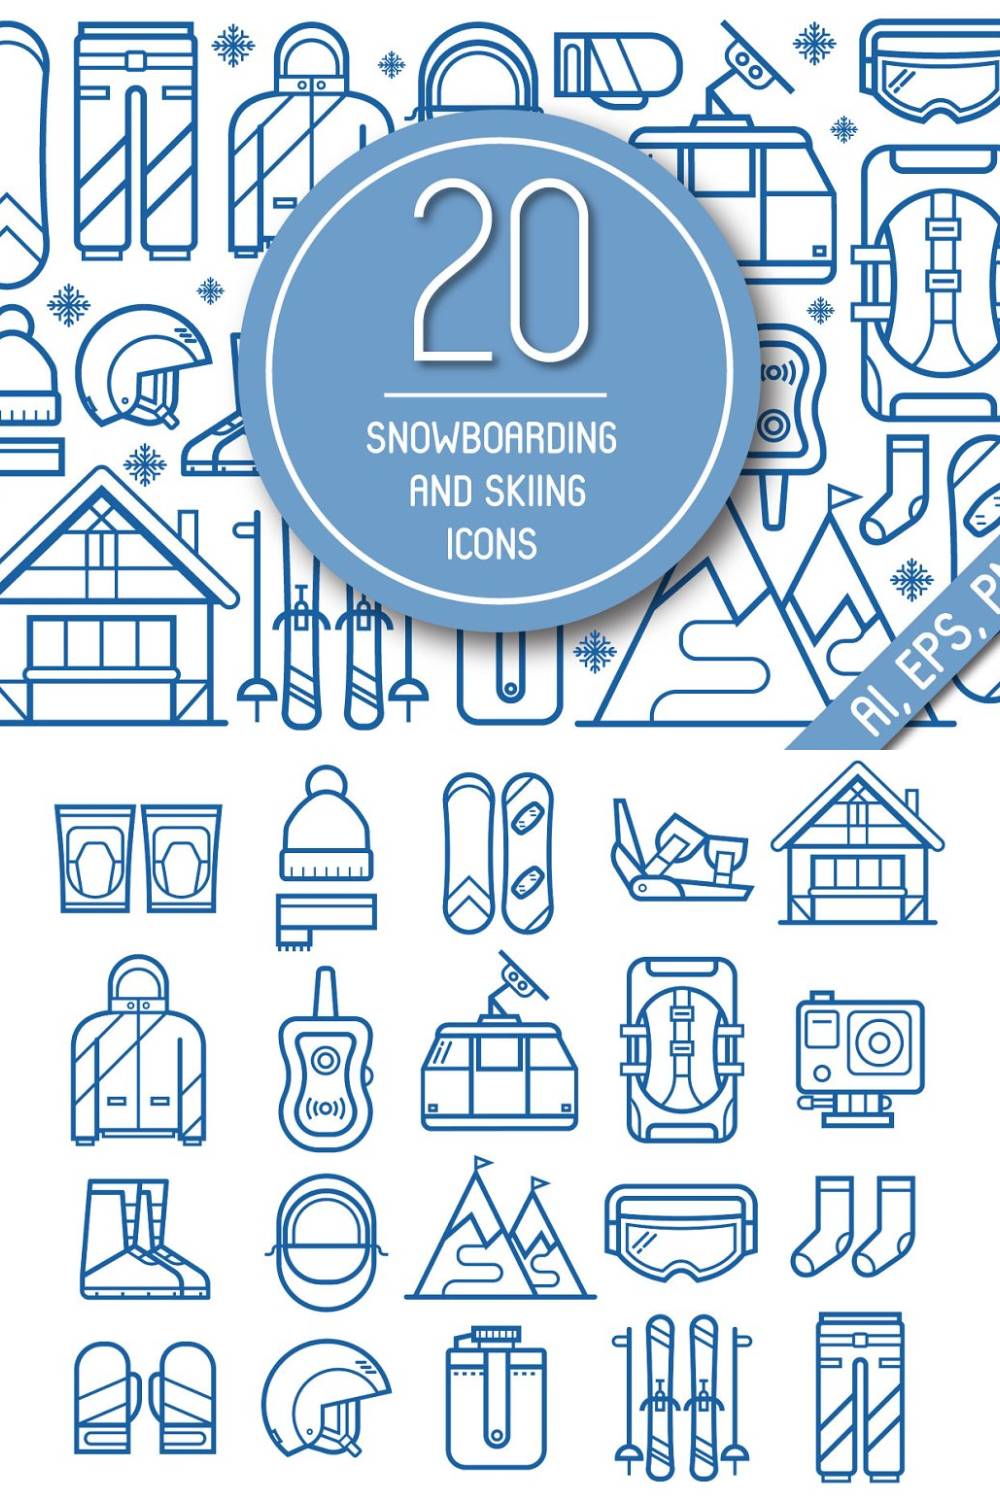 Snowboard And Ski Equipment Icons Pinterest Cover.